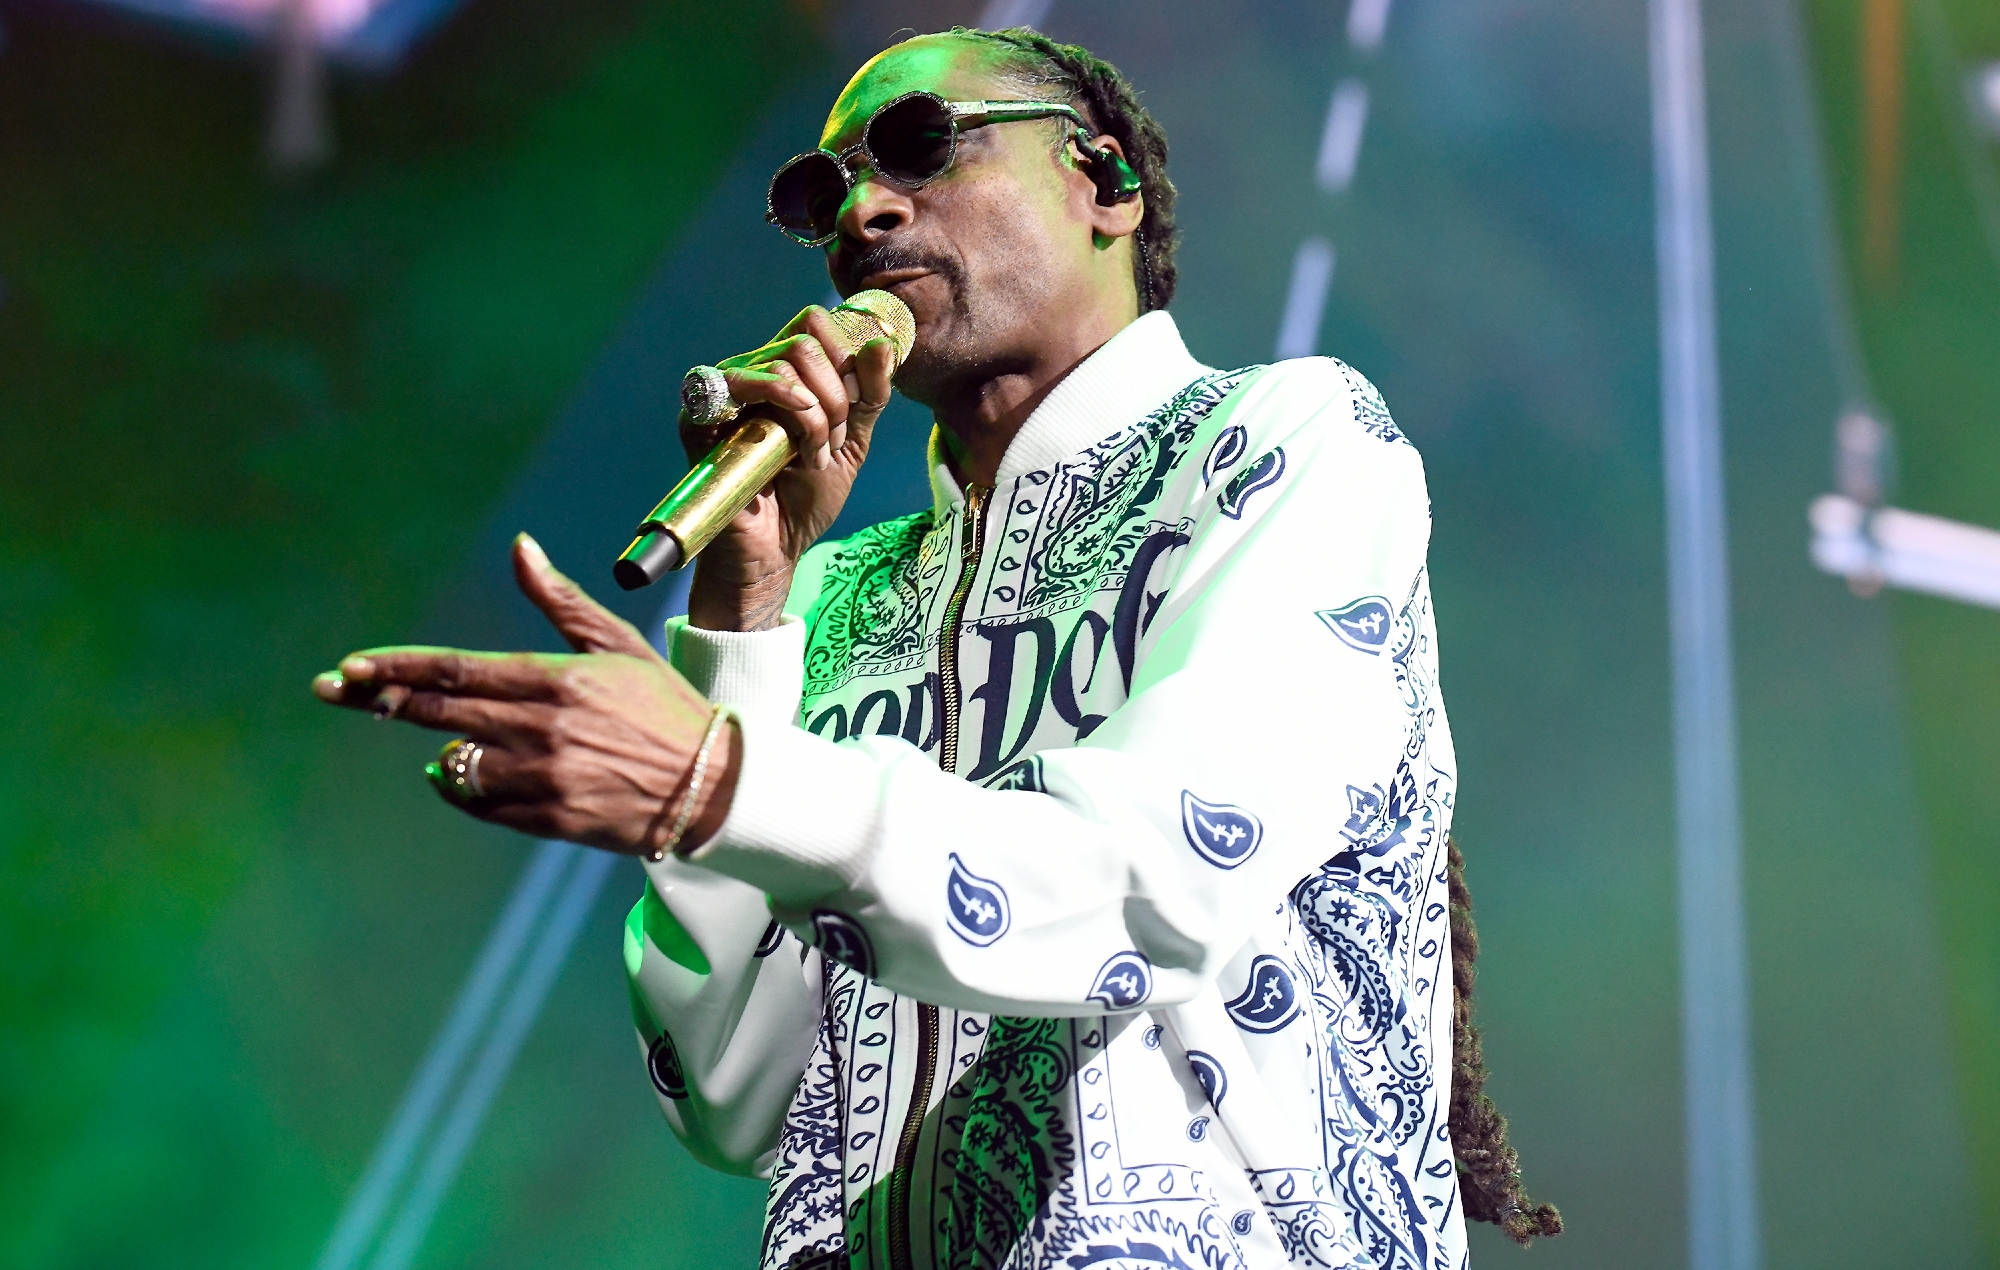 Snoop Dogg is now a "Dungeon Master" thanks to Meta's new AI